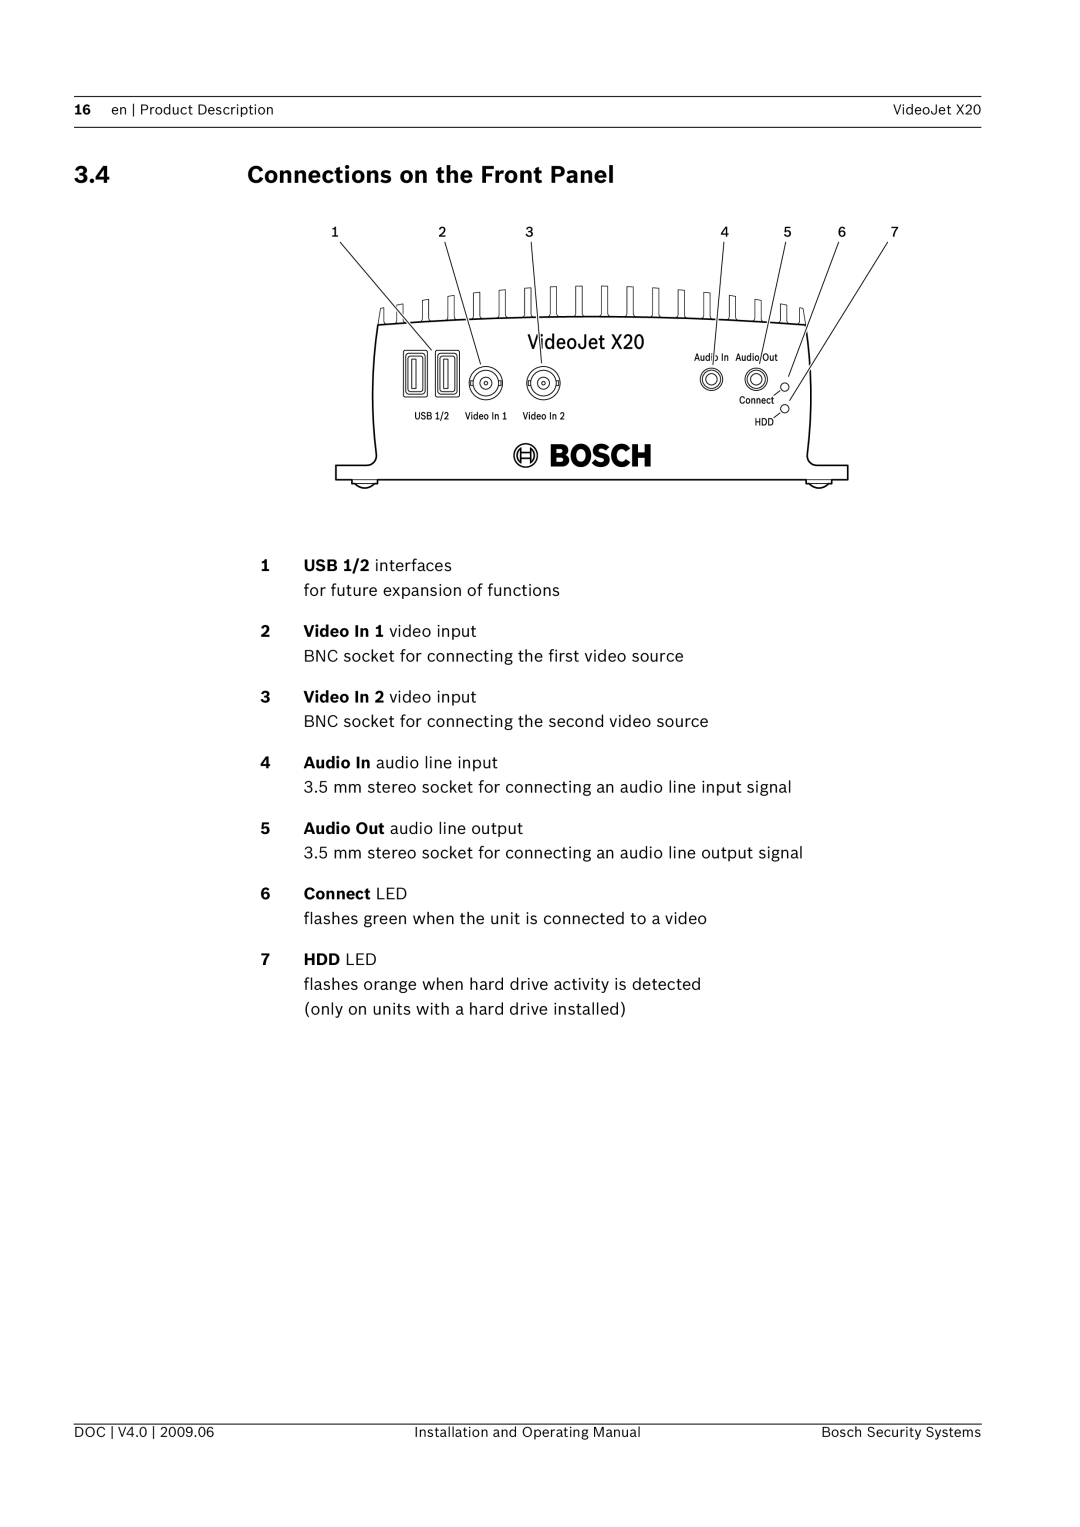 Bosch Appliances X20 manual Connections on the Front Panel, Video In 1 video input, Video In 2 video input, Connect LED 